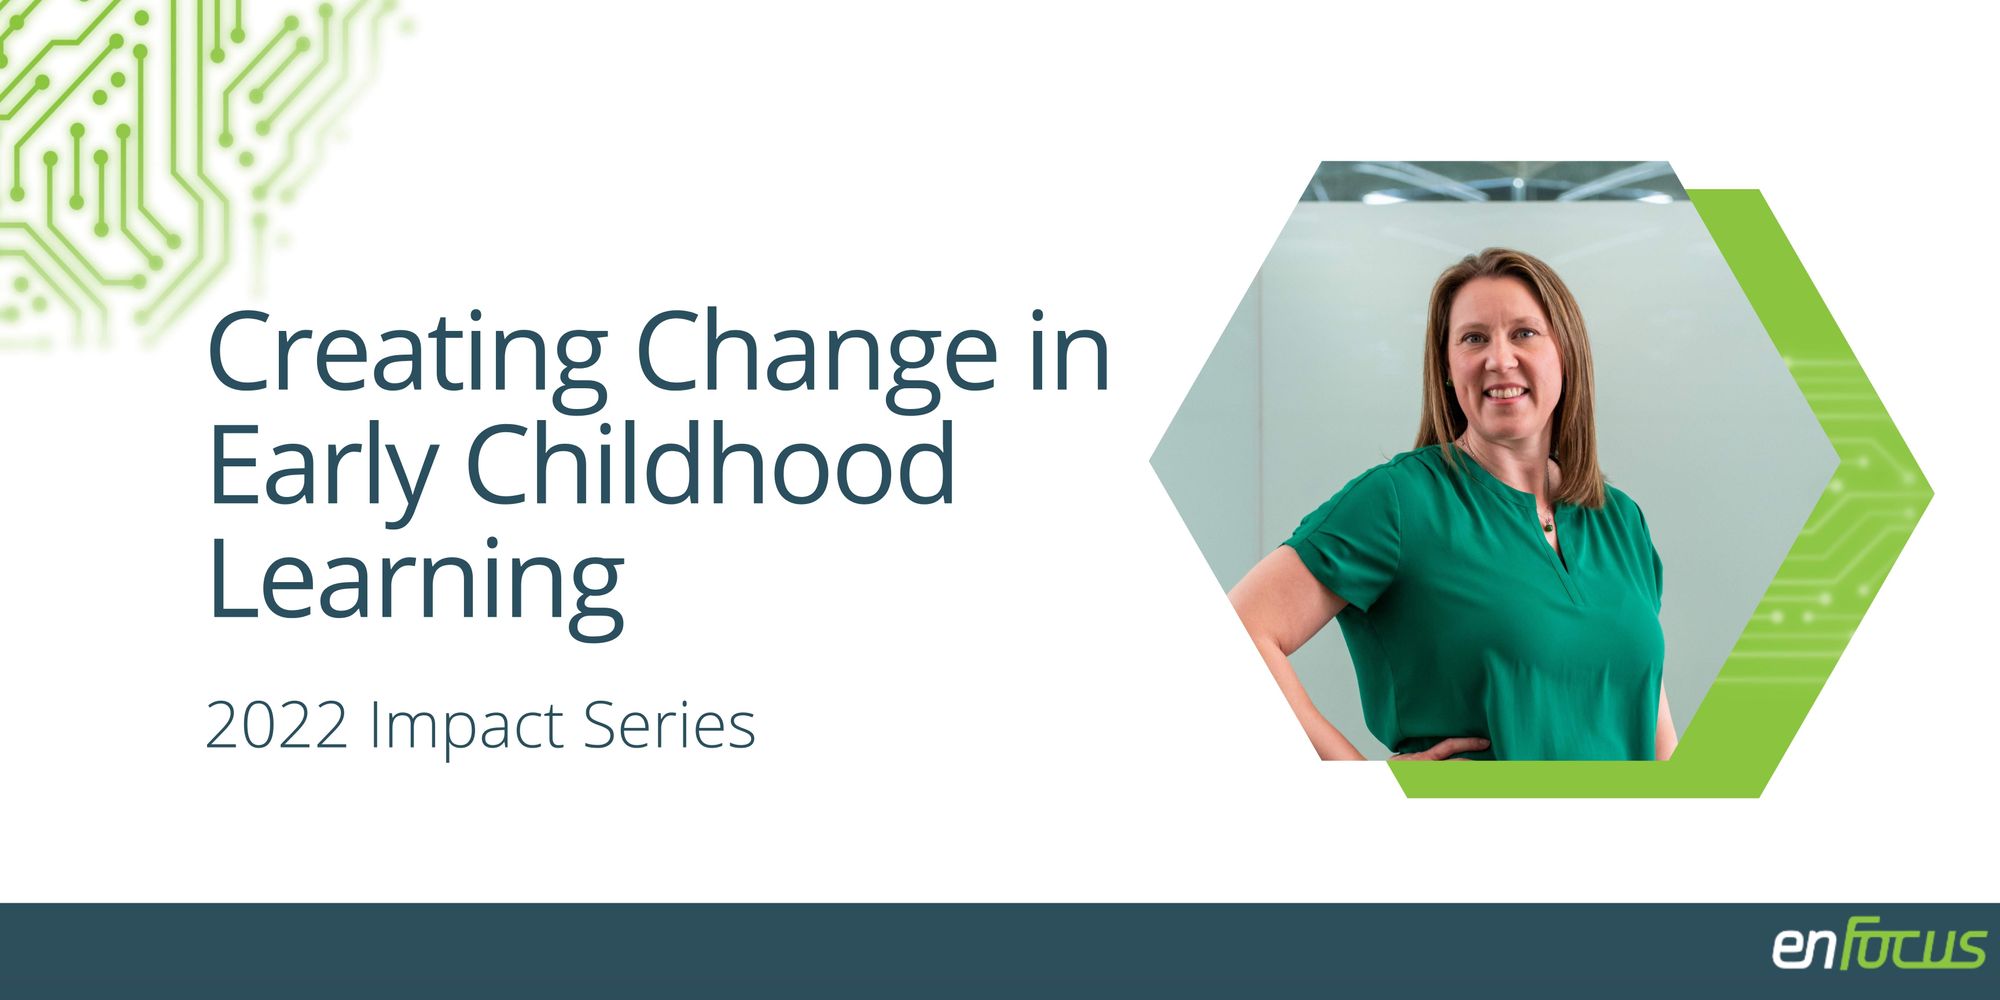 Rosannah Mack is Creating Change in Early Childhood Learning